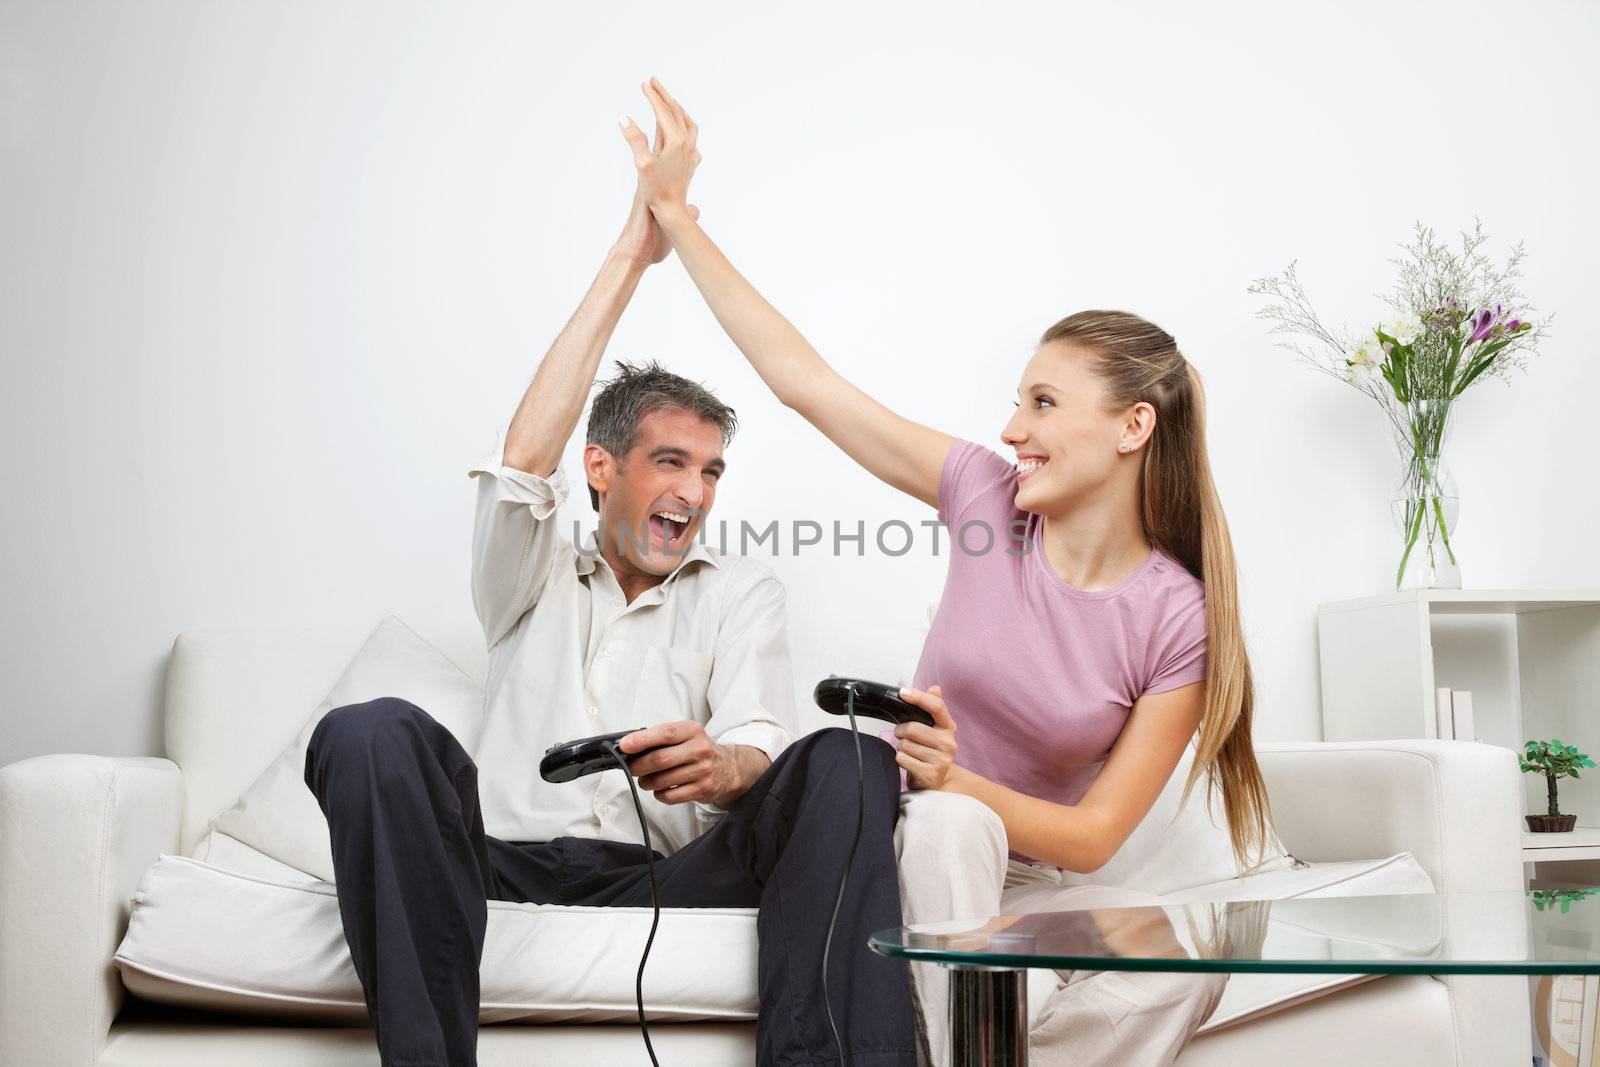 Couple giving a high-five to each other while having great time playing video game together